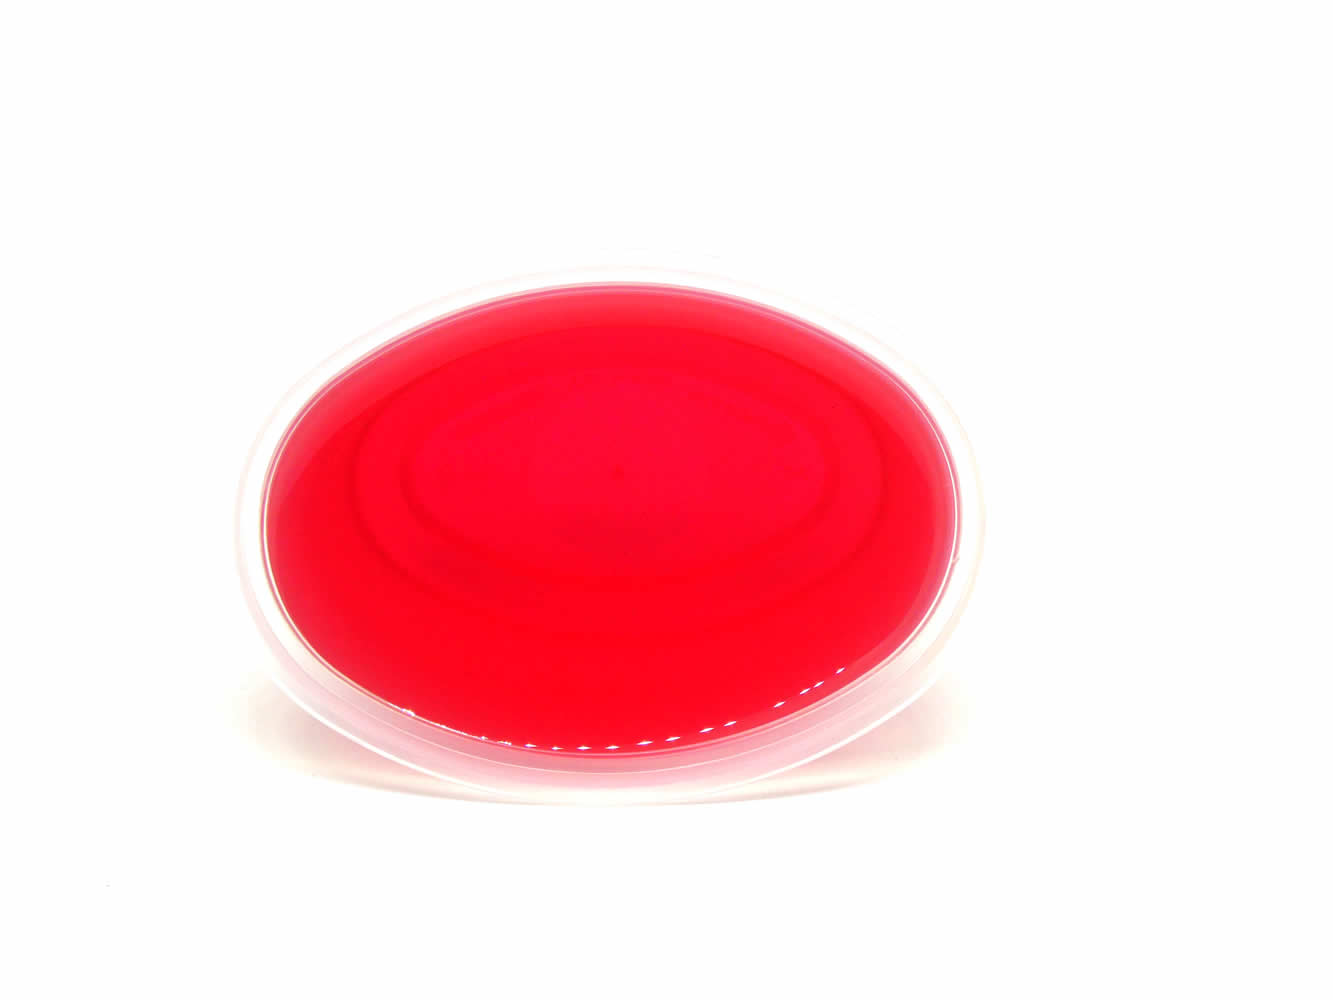 Strawberry scented Gel Melts™ Gel Wax for warmers - 3 pack